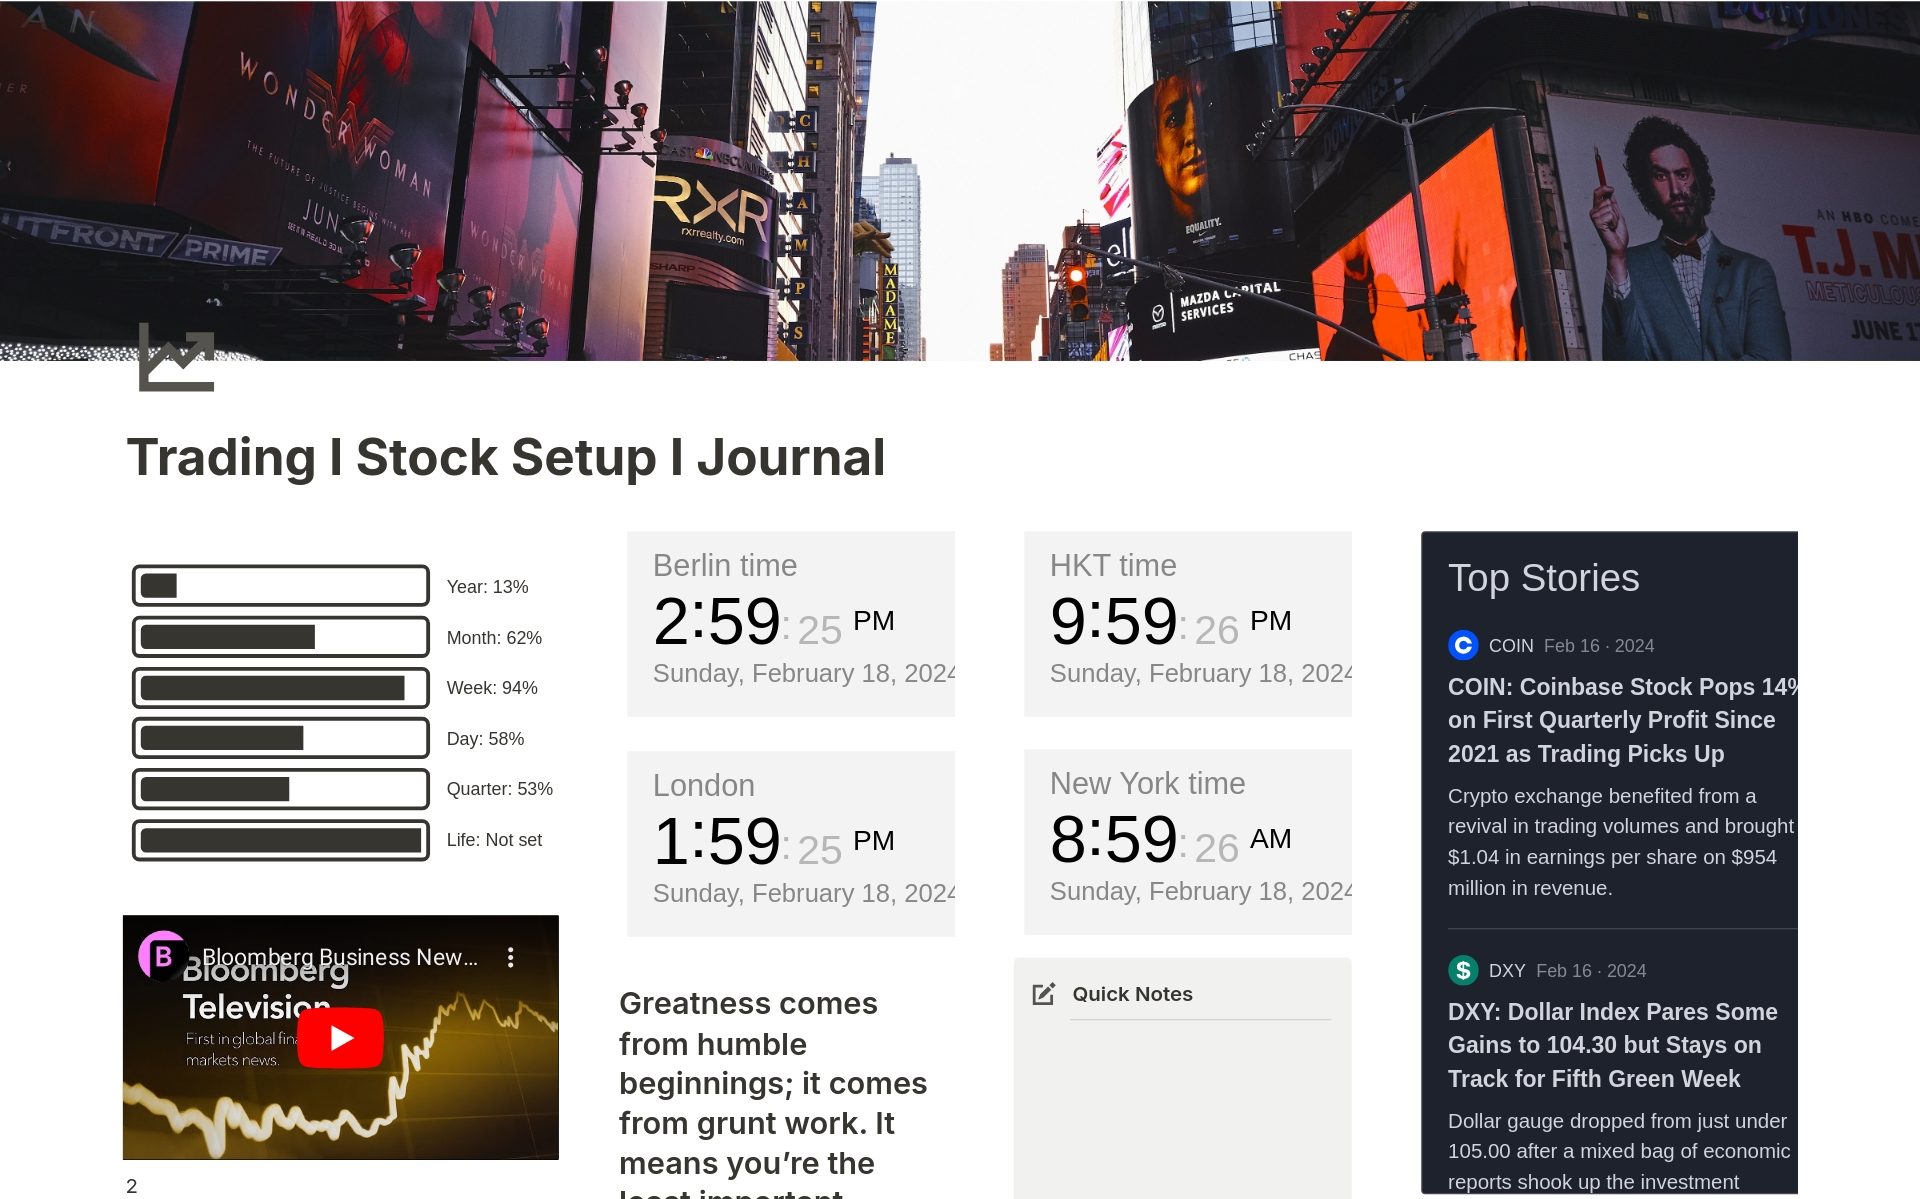 "Trading I Stock Setup I Journal": Your complete stock trading template! World clocks, news video, top stories, habit tracker, economic calendar, stock heat map, stock screener, trading journal. All in One.